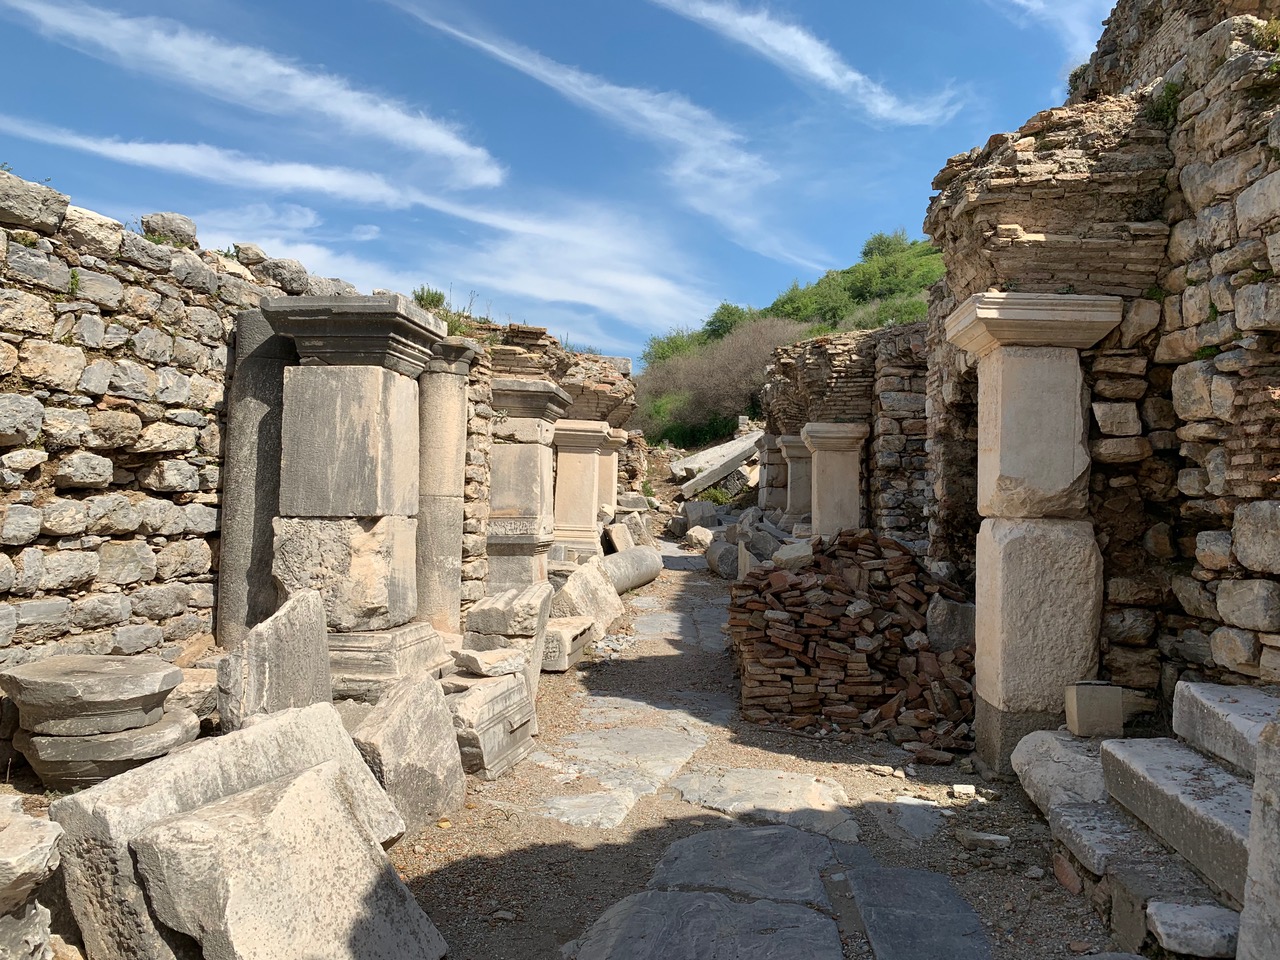 Rows of stone shops in a narrow alley